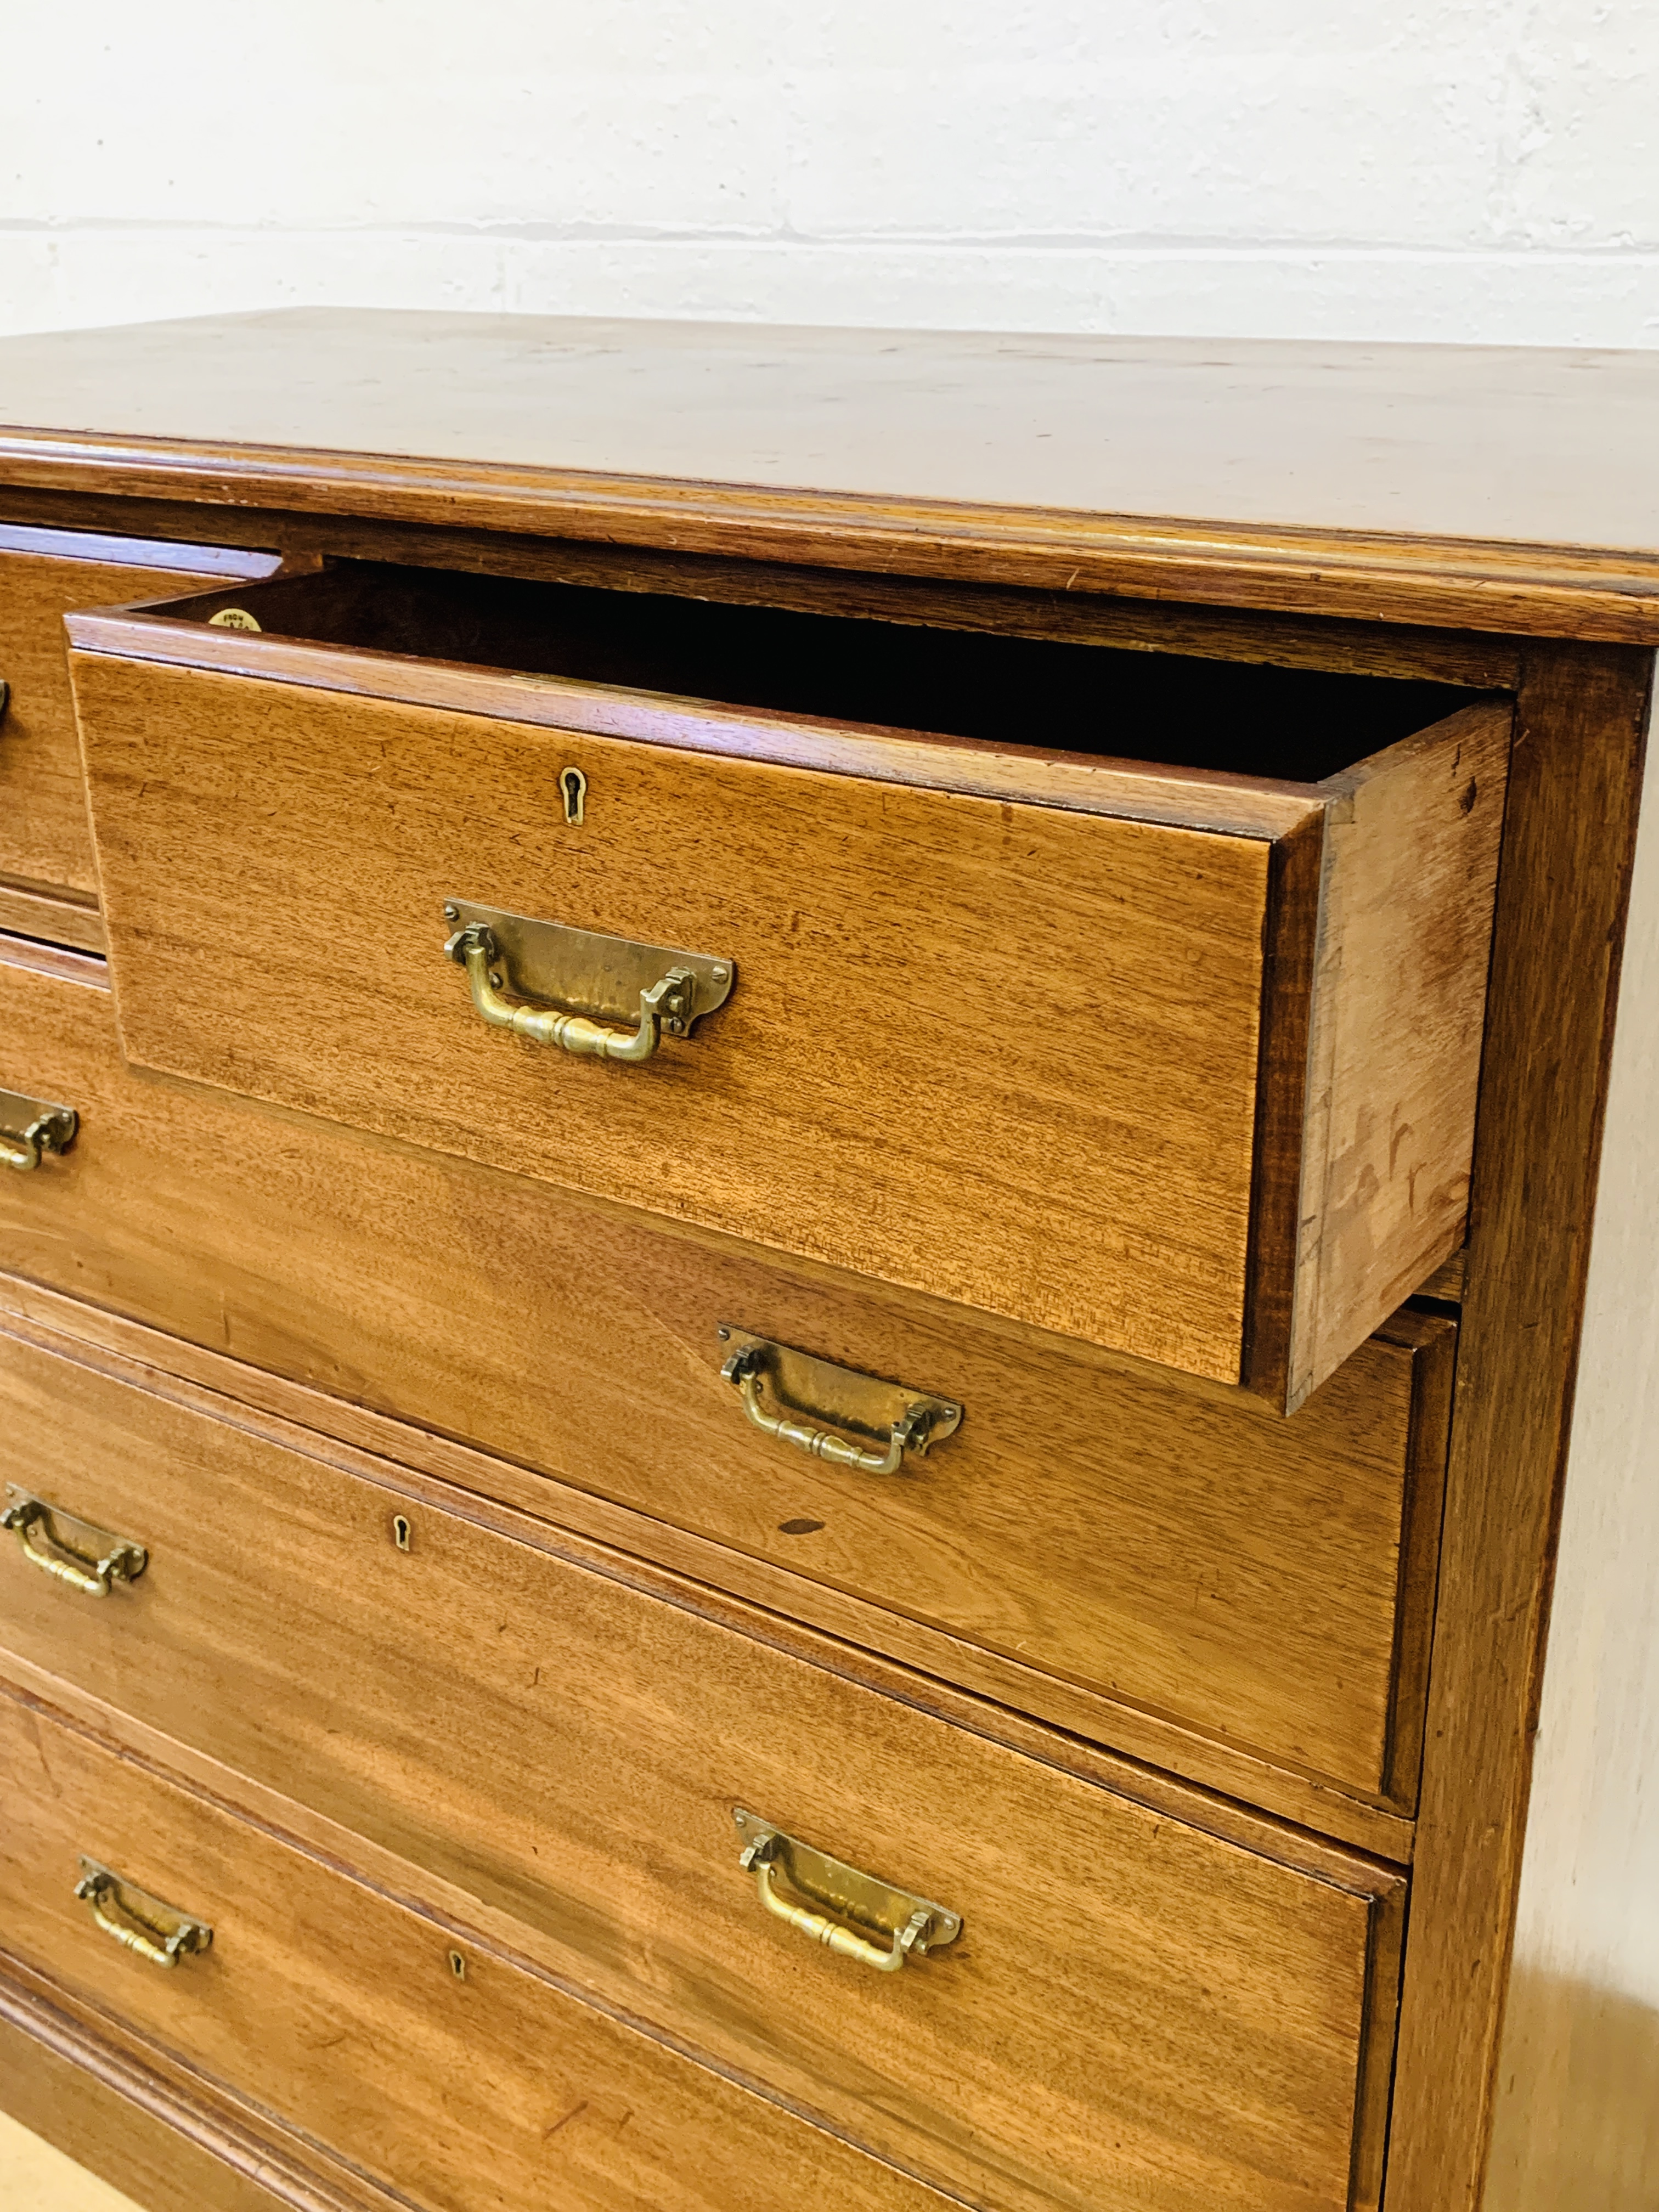 Mahogany chest of drawers - Image 2 of 8